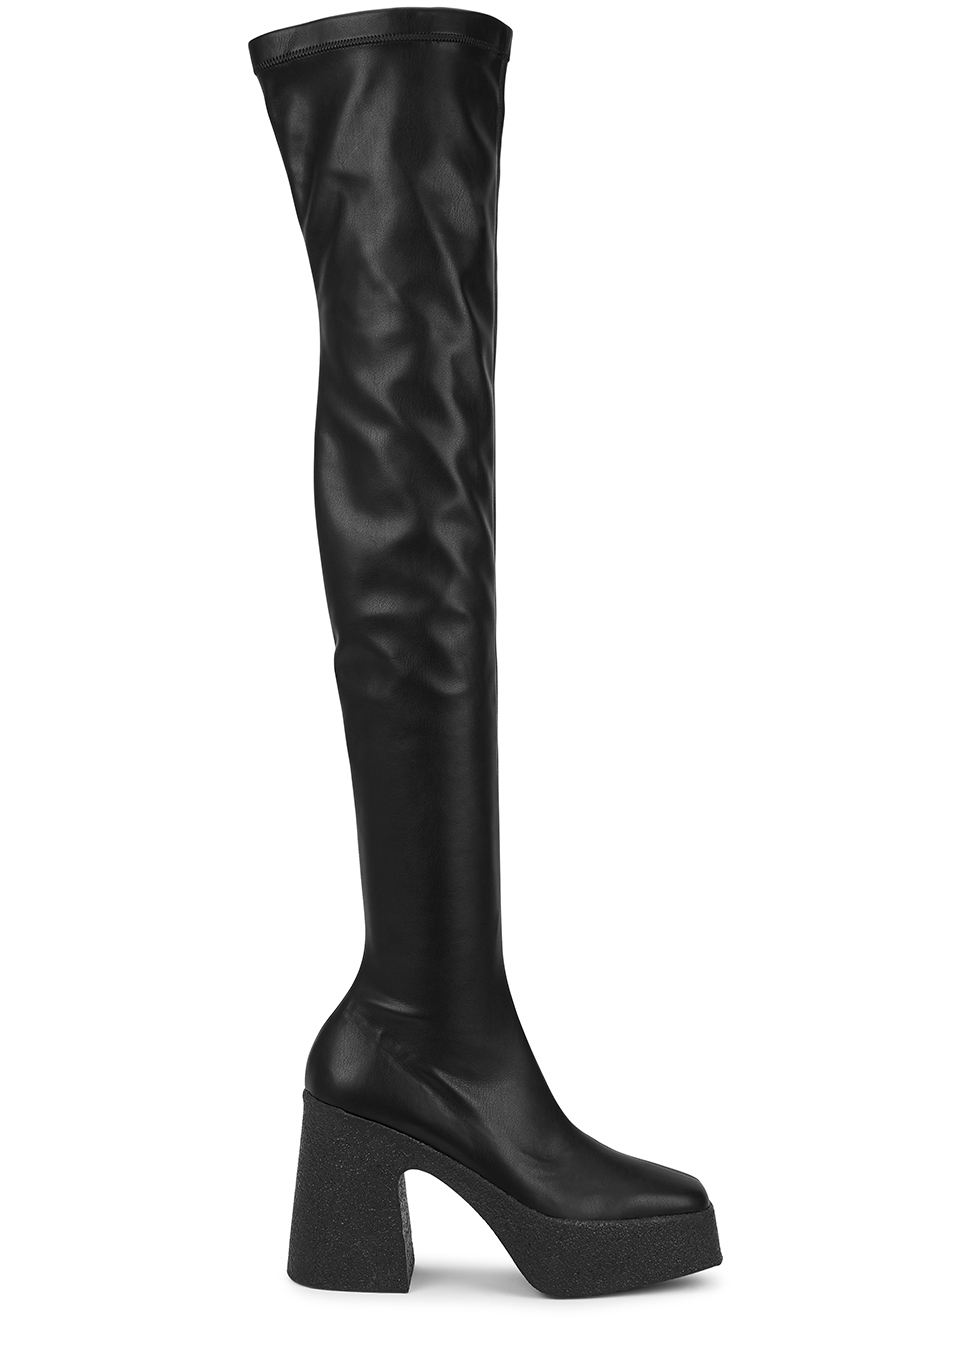 Skyla black faux leather over-the-knee boots